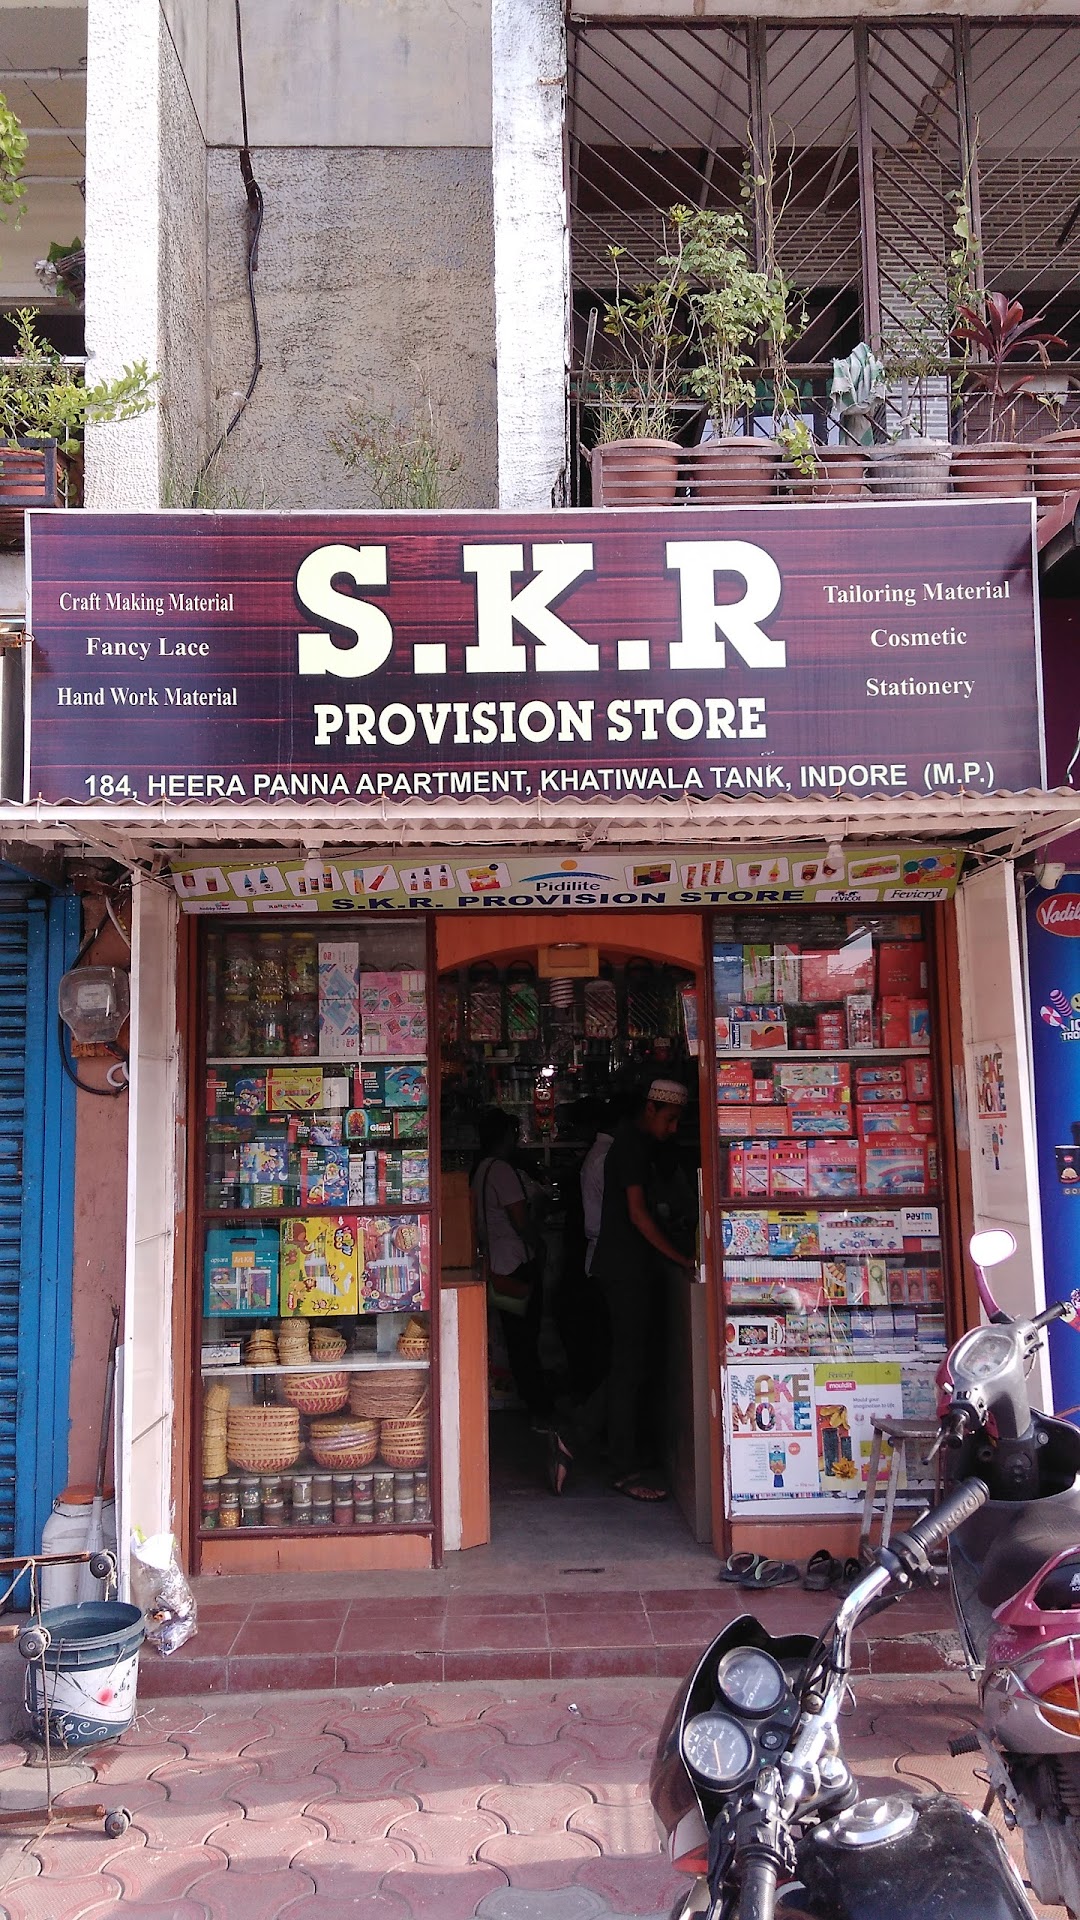 S.K.R. General Stores